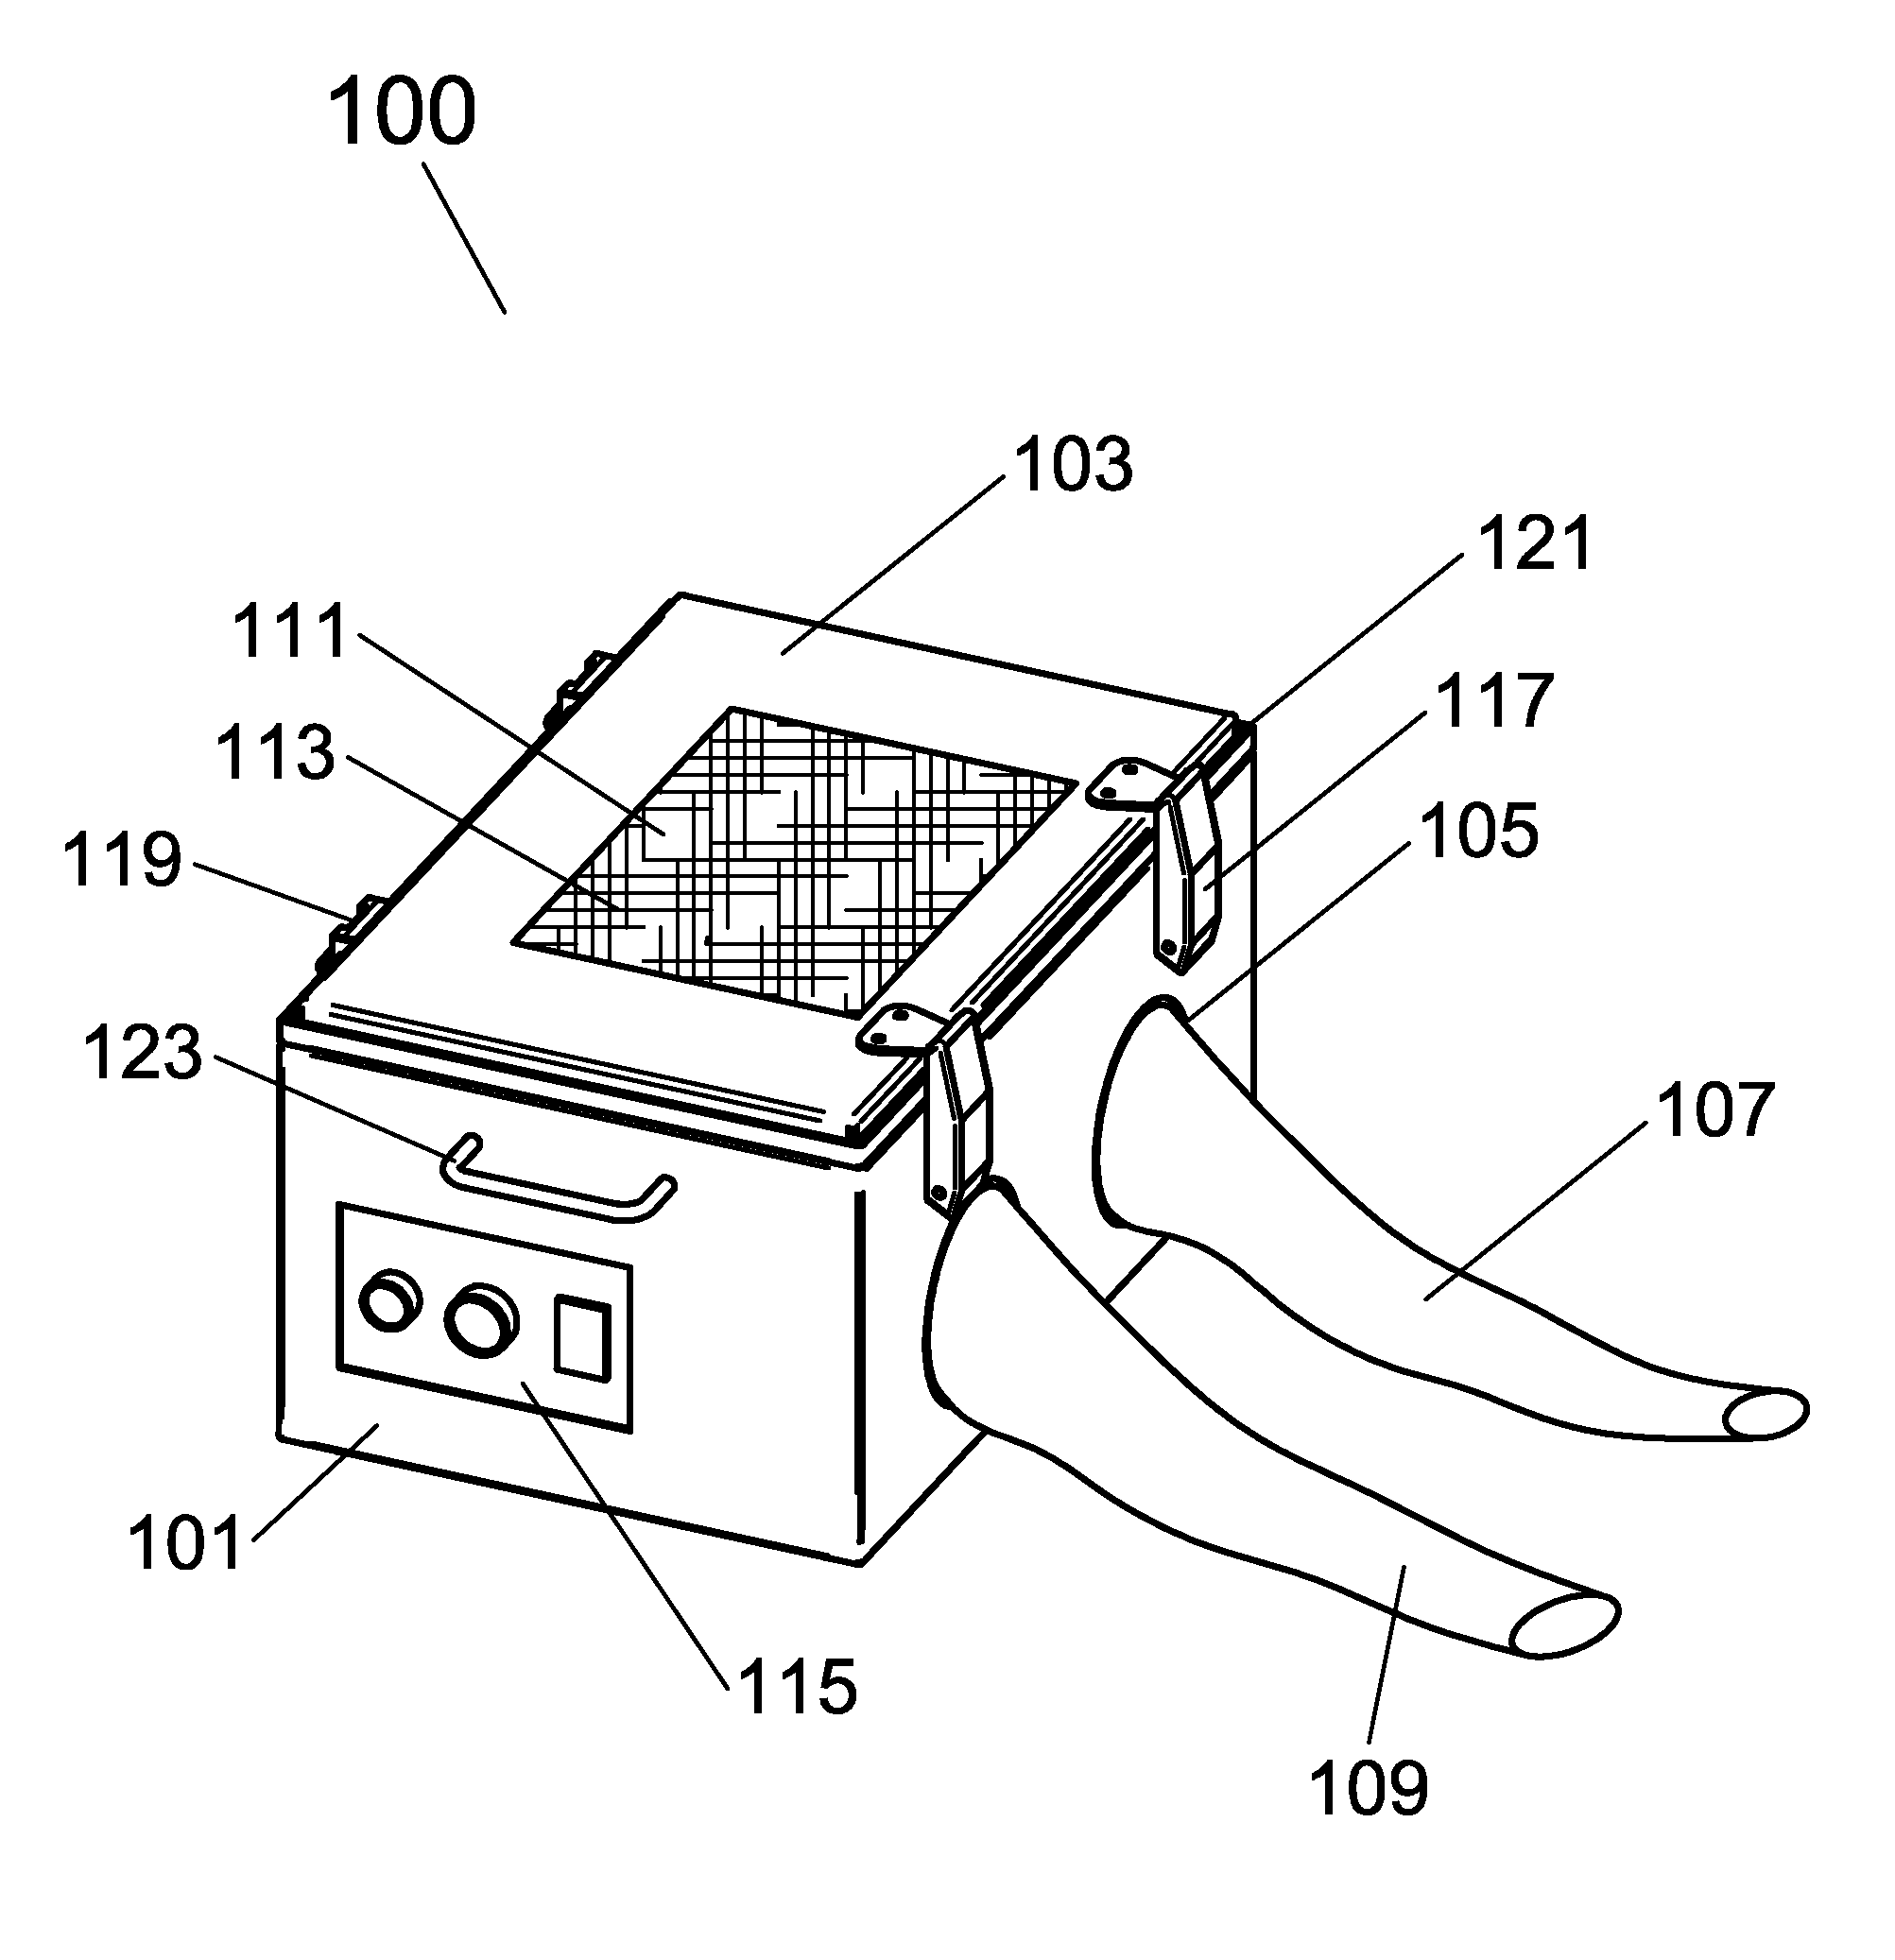 Electromagnetic isolation chamber with unimpeded hand entry